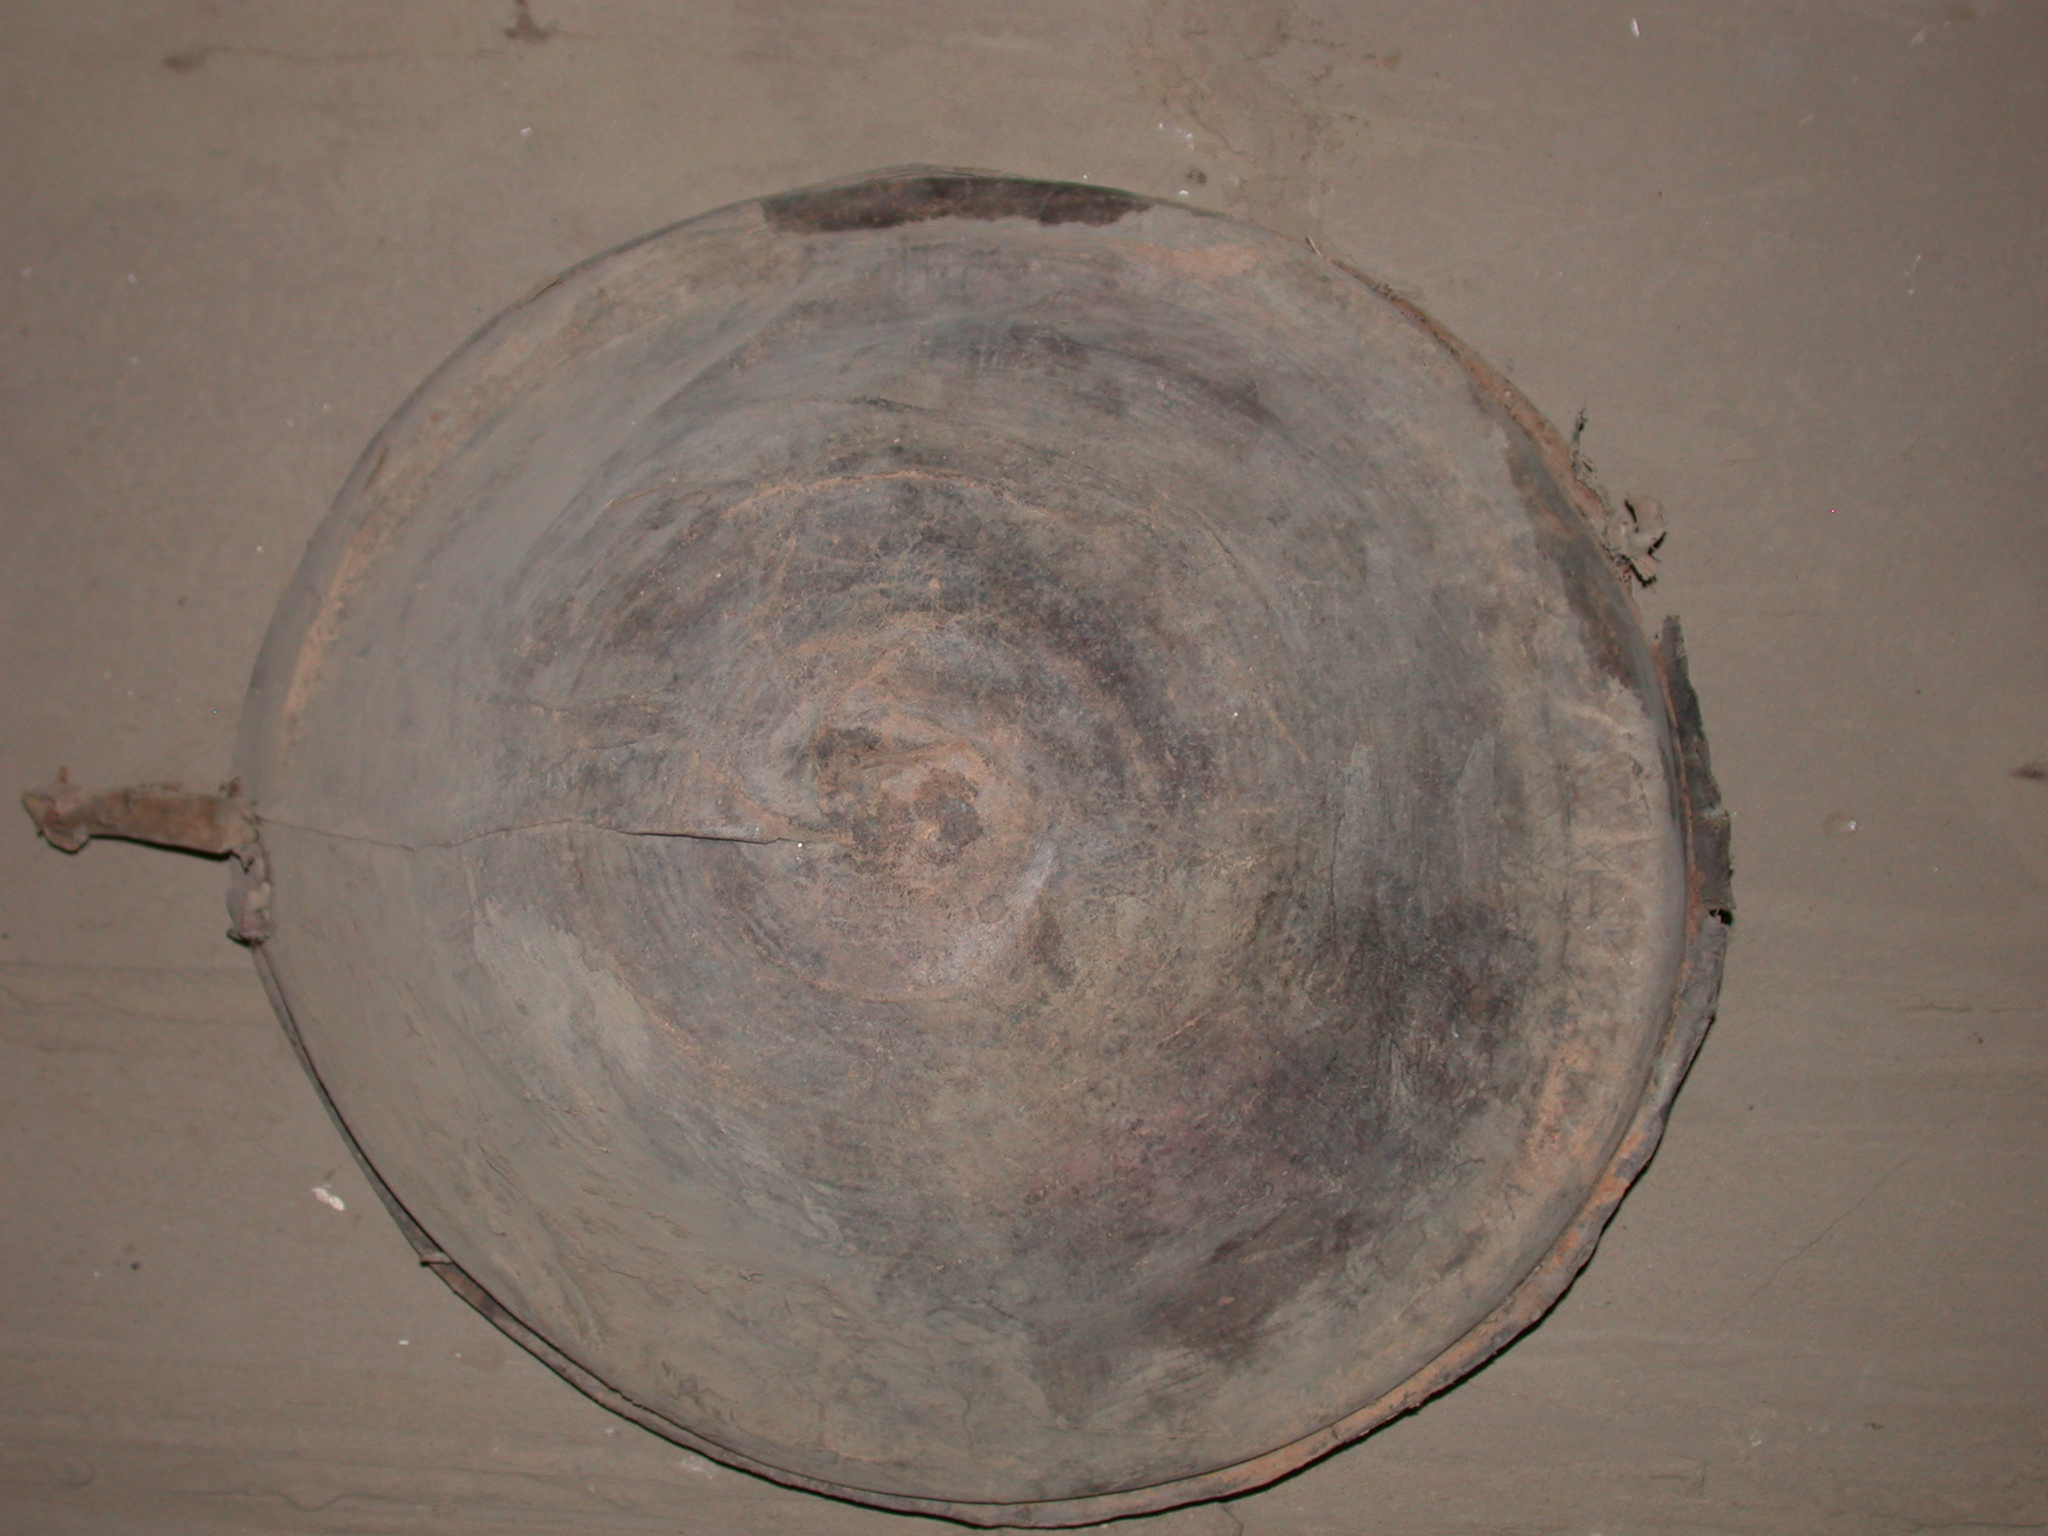 Unknown Object Possibly Drum, Timbuktu Ethnological Museum, Timbuktu, Mali